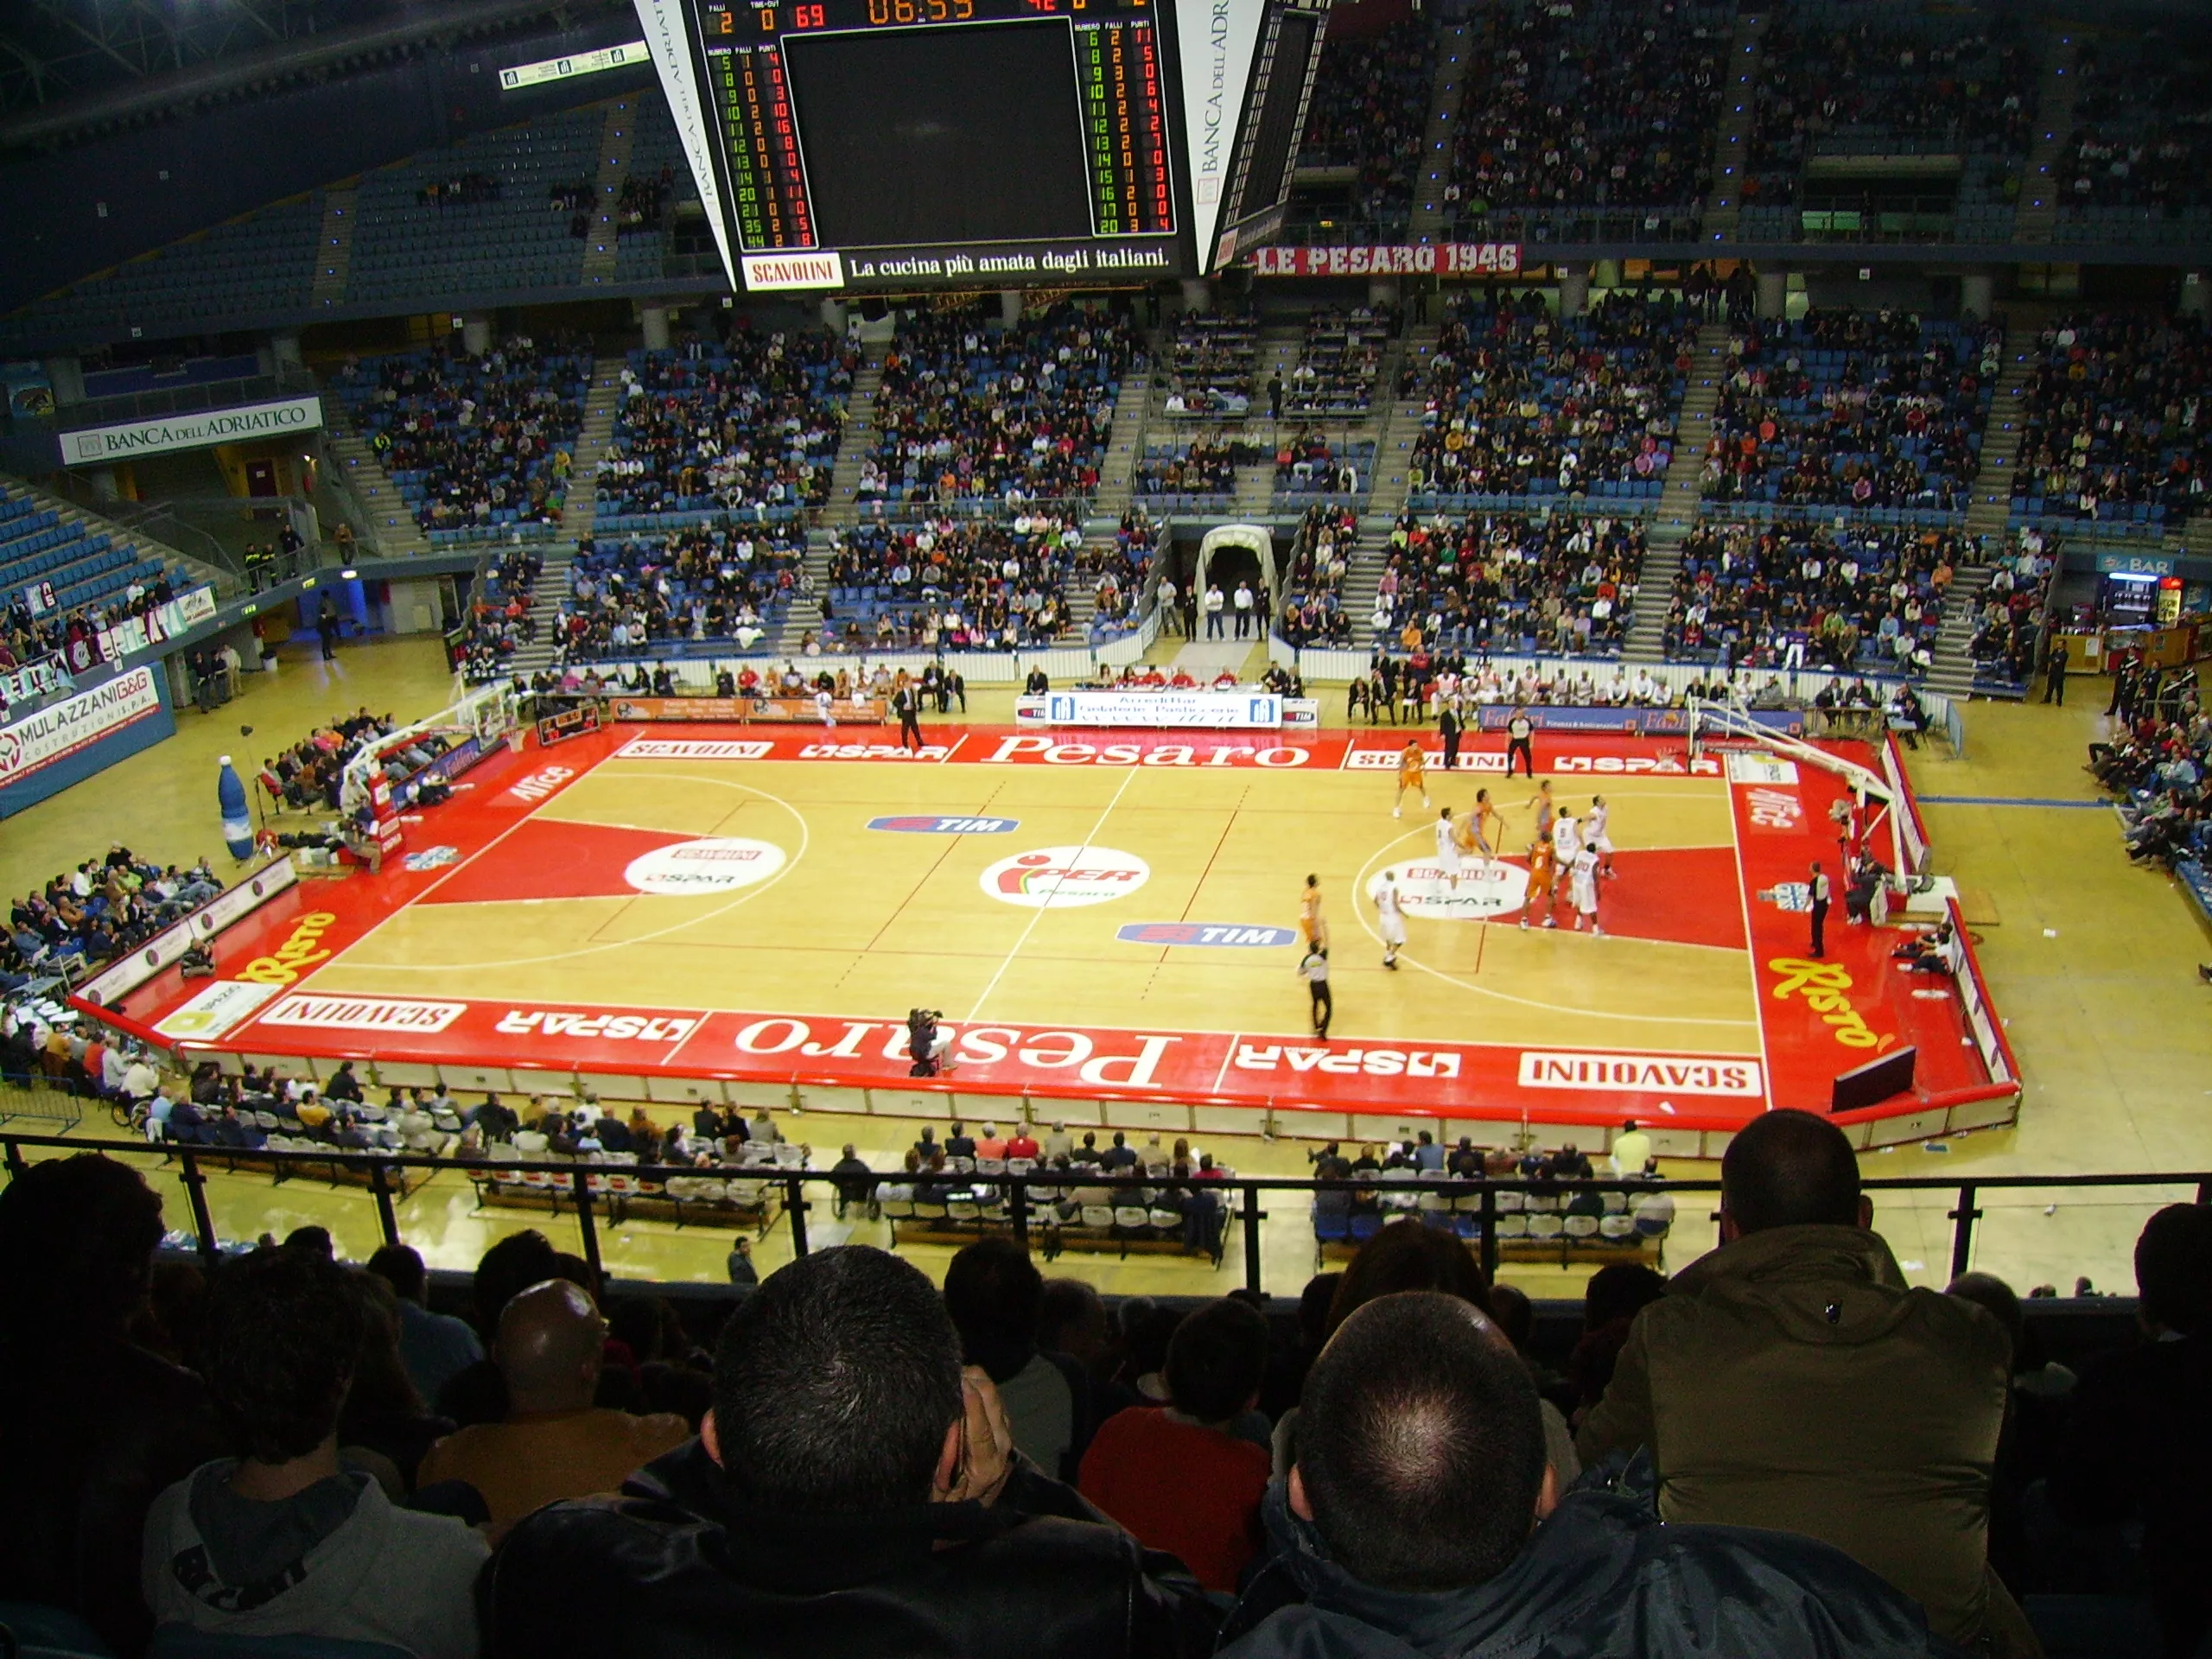 Adriatic Arena in Italy, Europe | Basketball - Rated 3.8